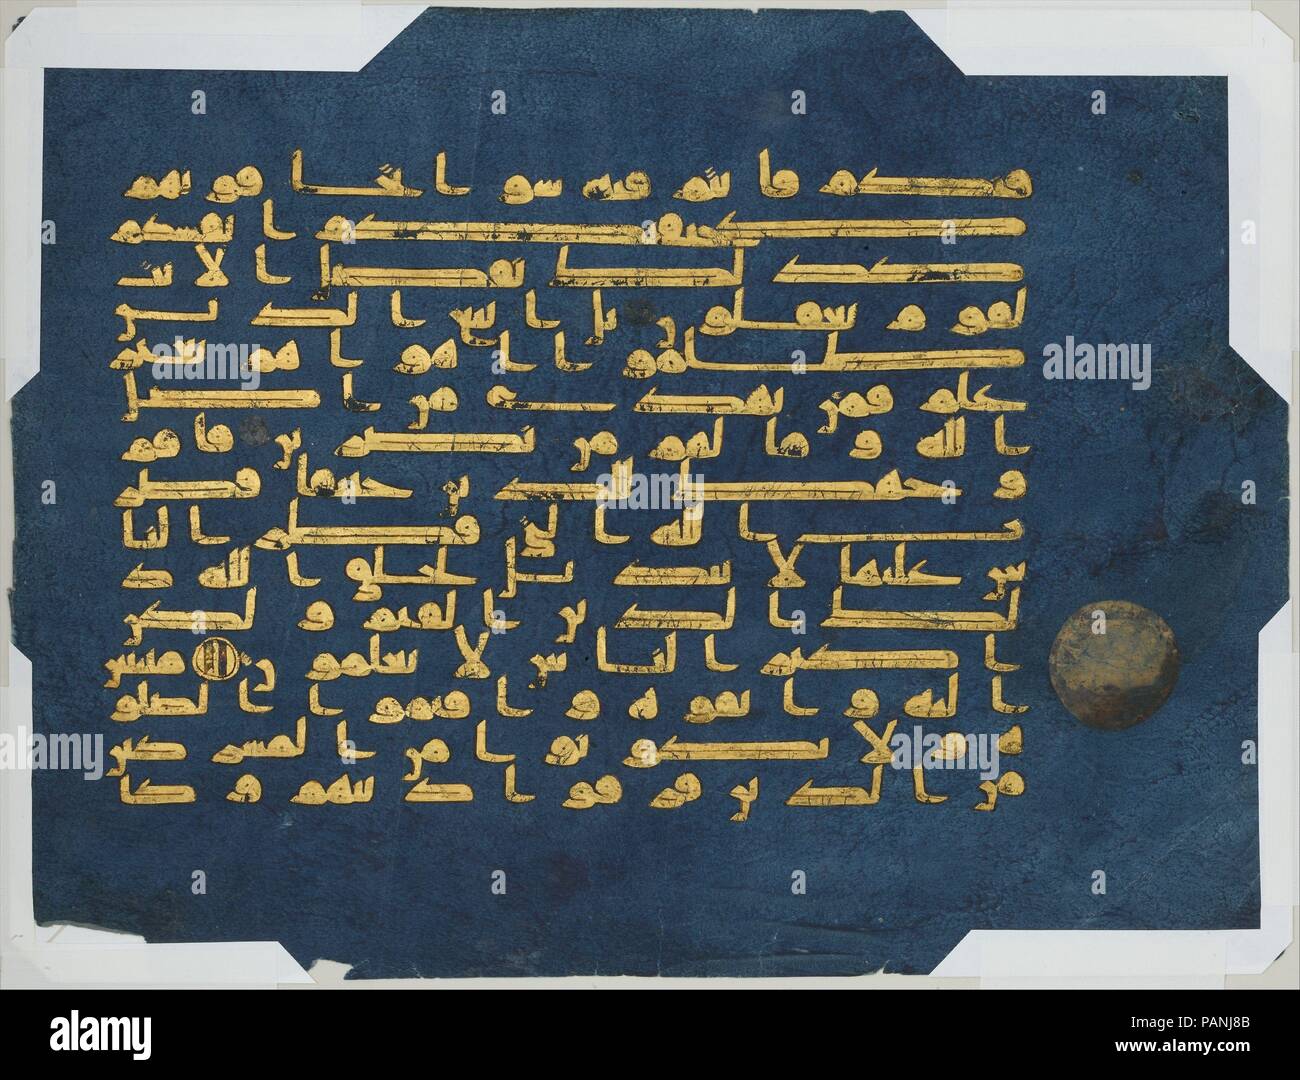 Folio from the 'Blue Qur'an'. Dimensions: 11 15/16 x 15 13/16 in. (30.4 x 40.2 cm). Date: second half 9th-mid-10th century.  This folio comes from a sumptuous, multivolume Qur'an with indigo pages and silver verse markers that was probably copied in North Africa. Its palette is thought to refer to the purple-dyed, gilded manuscripts made in the neighboring Byzantine empire. As in other early Qur'ans, the script here is difficult to read because the letters have been manipulated to make each line the same length, and the marks necessary to distinguish between letters have been omitted. Museum:  Stock Photo